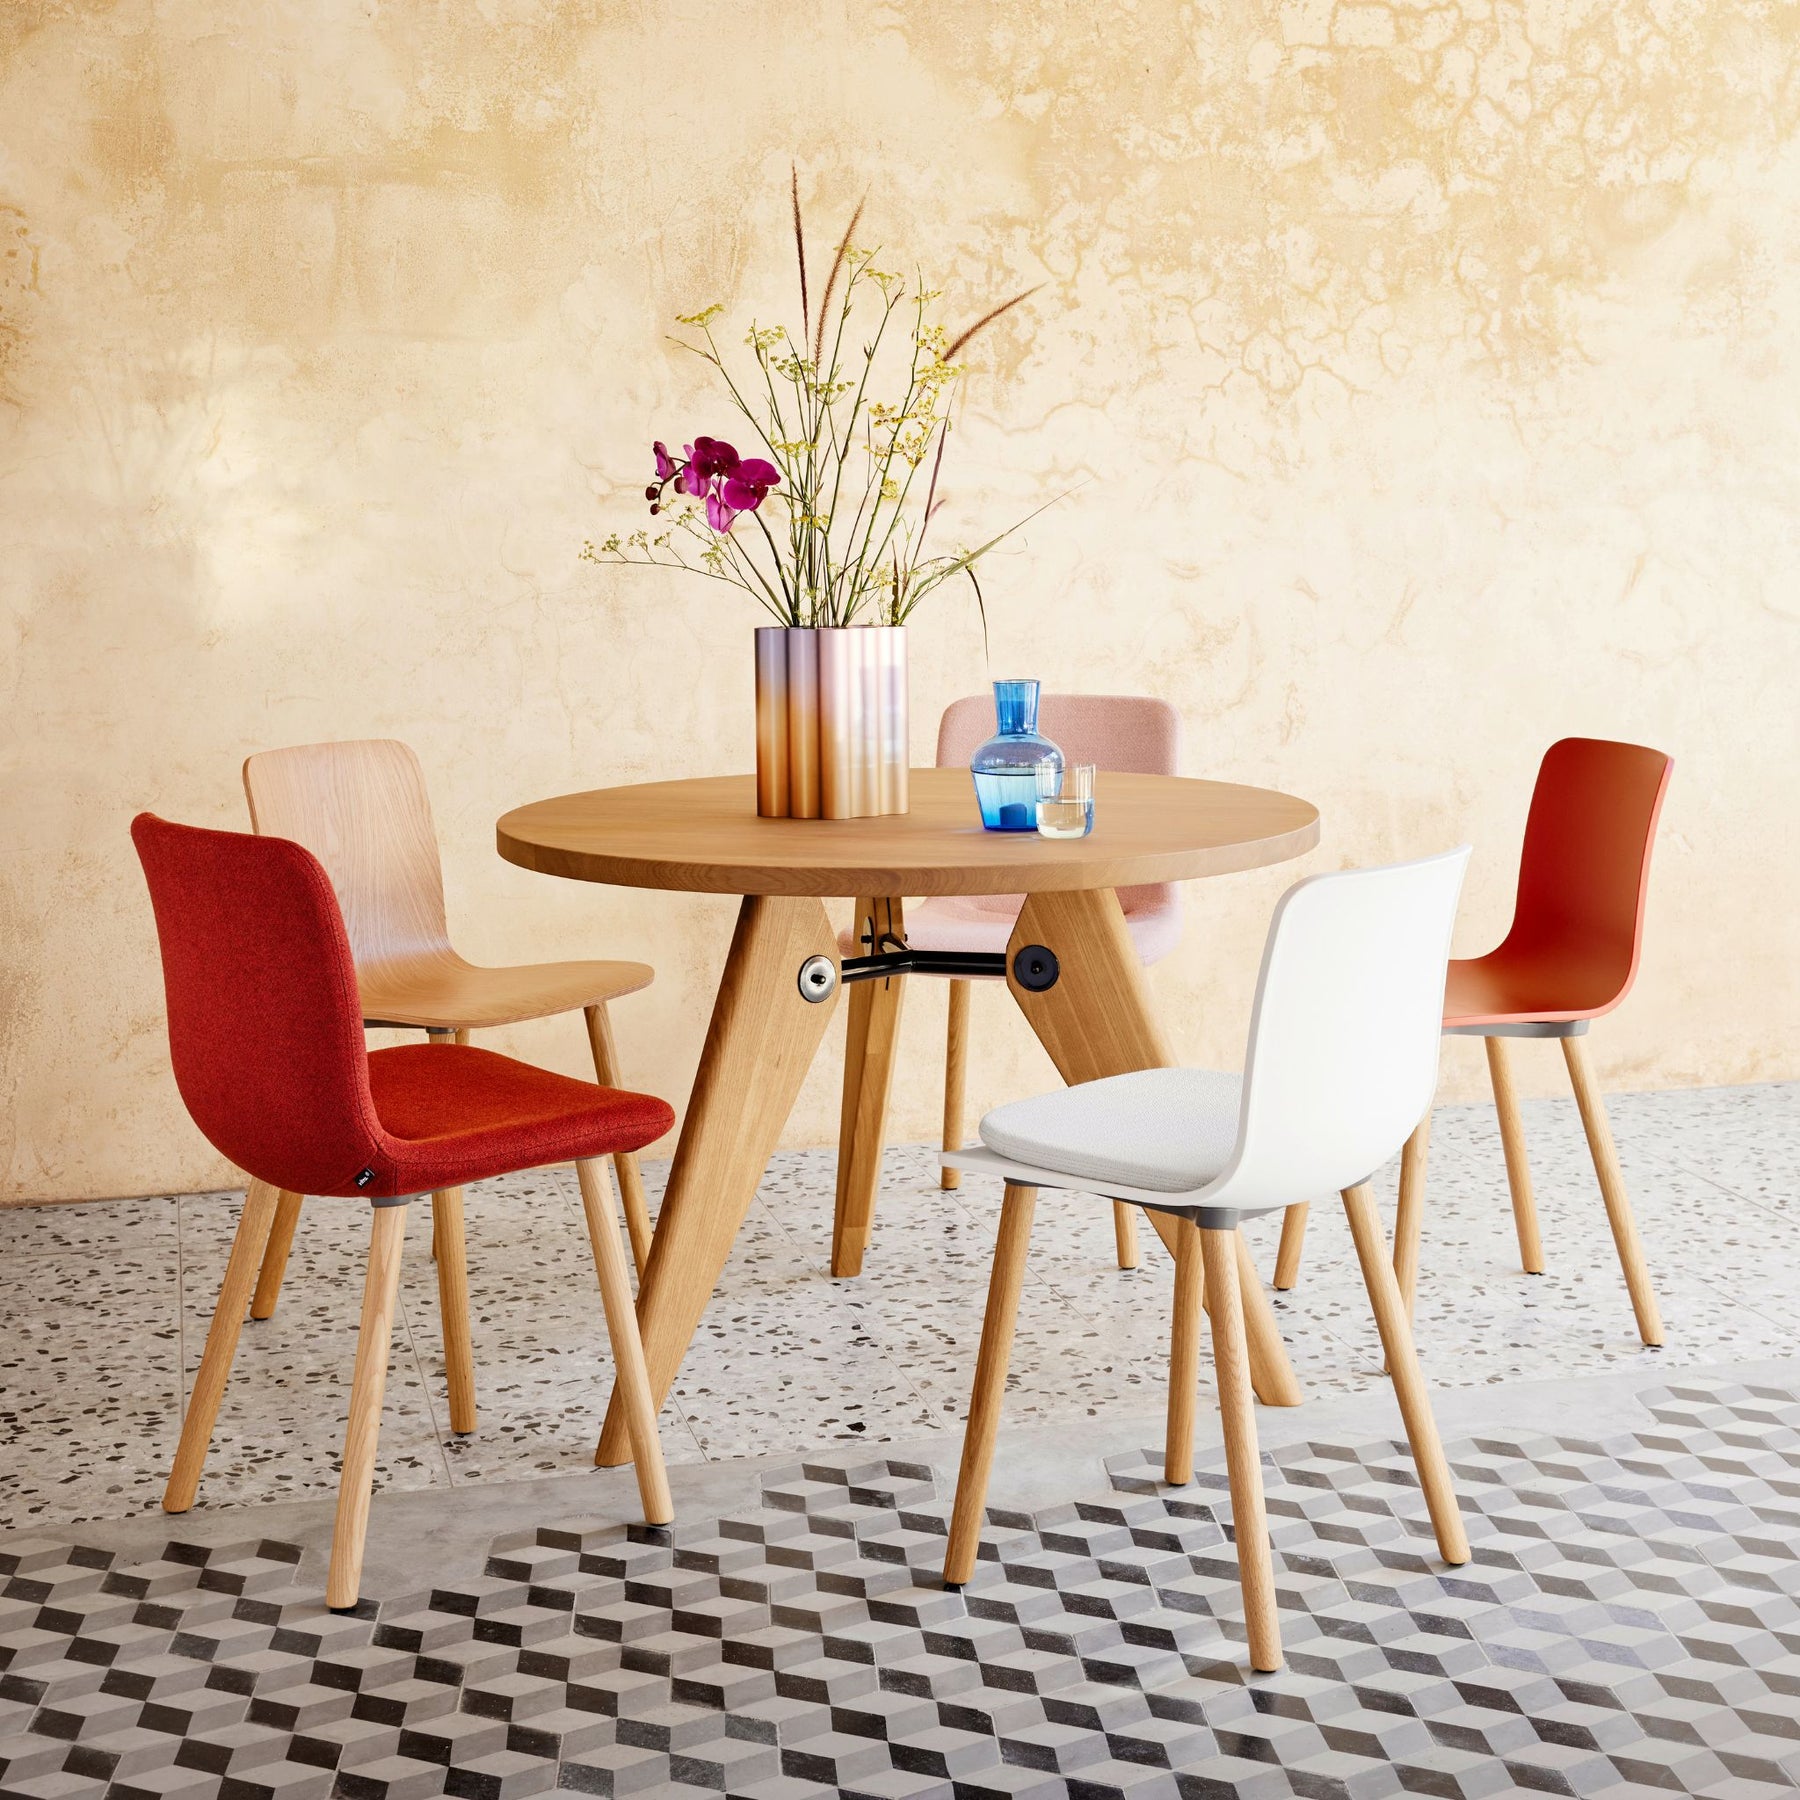 Vitra Prouvé Guéridon Dining Table with HAL Chairs and Nuage Vase